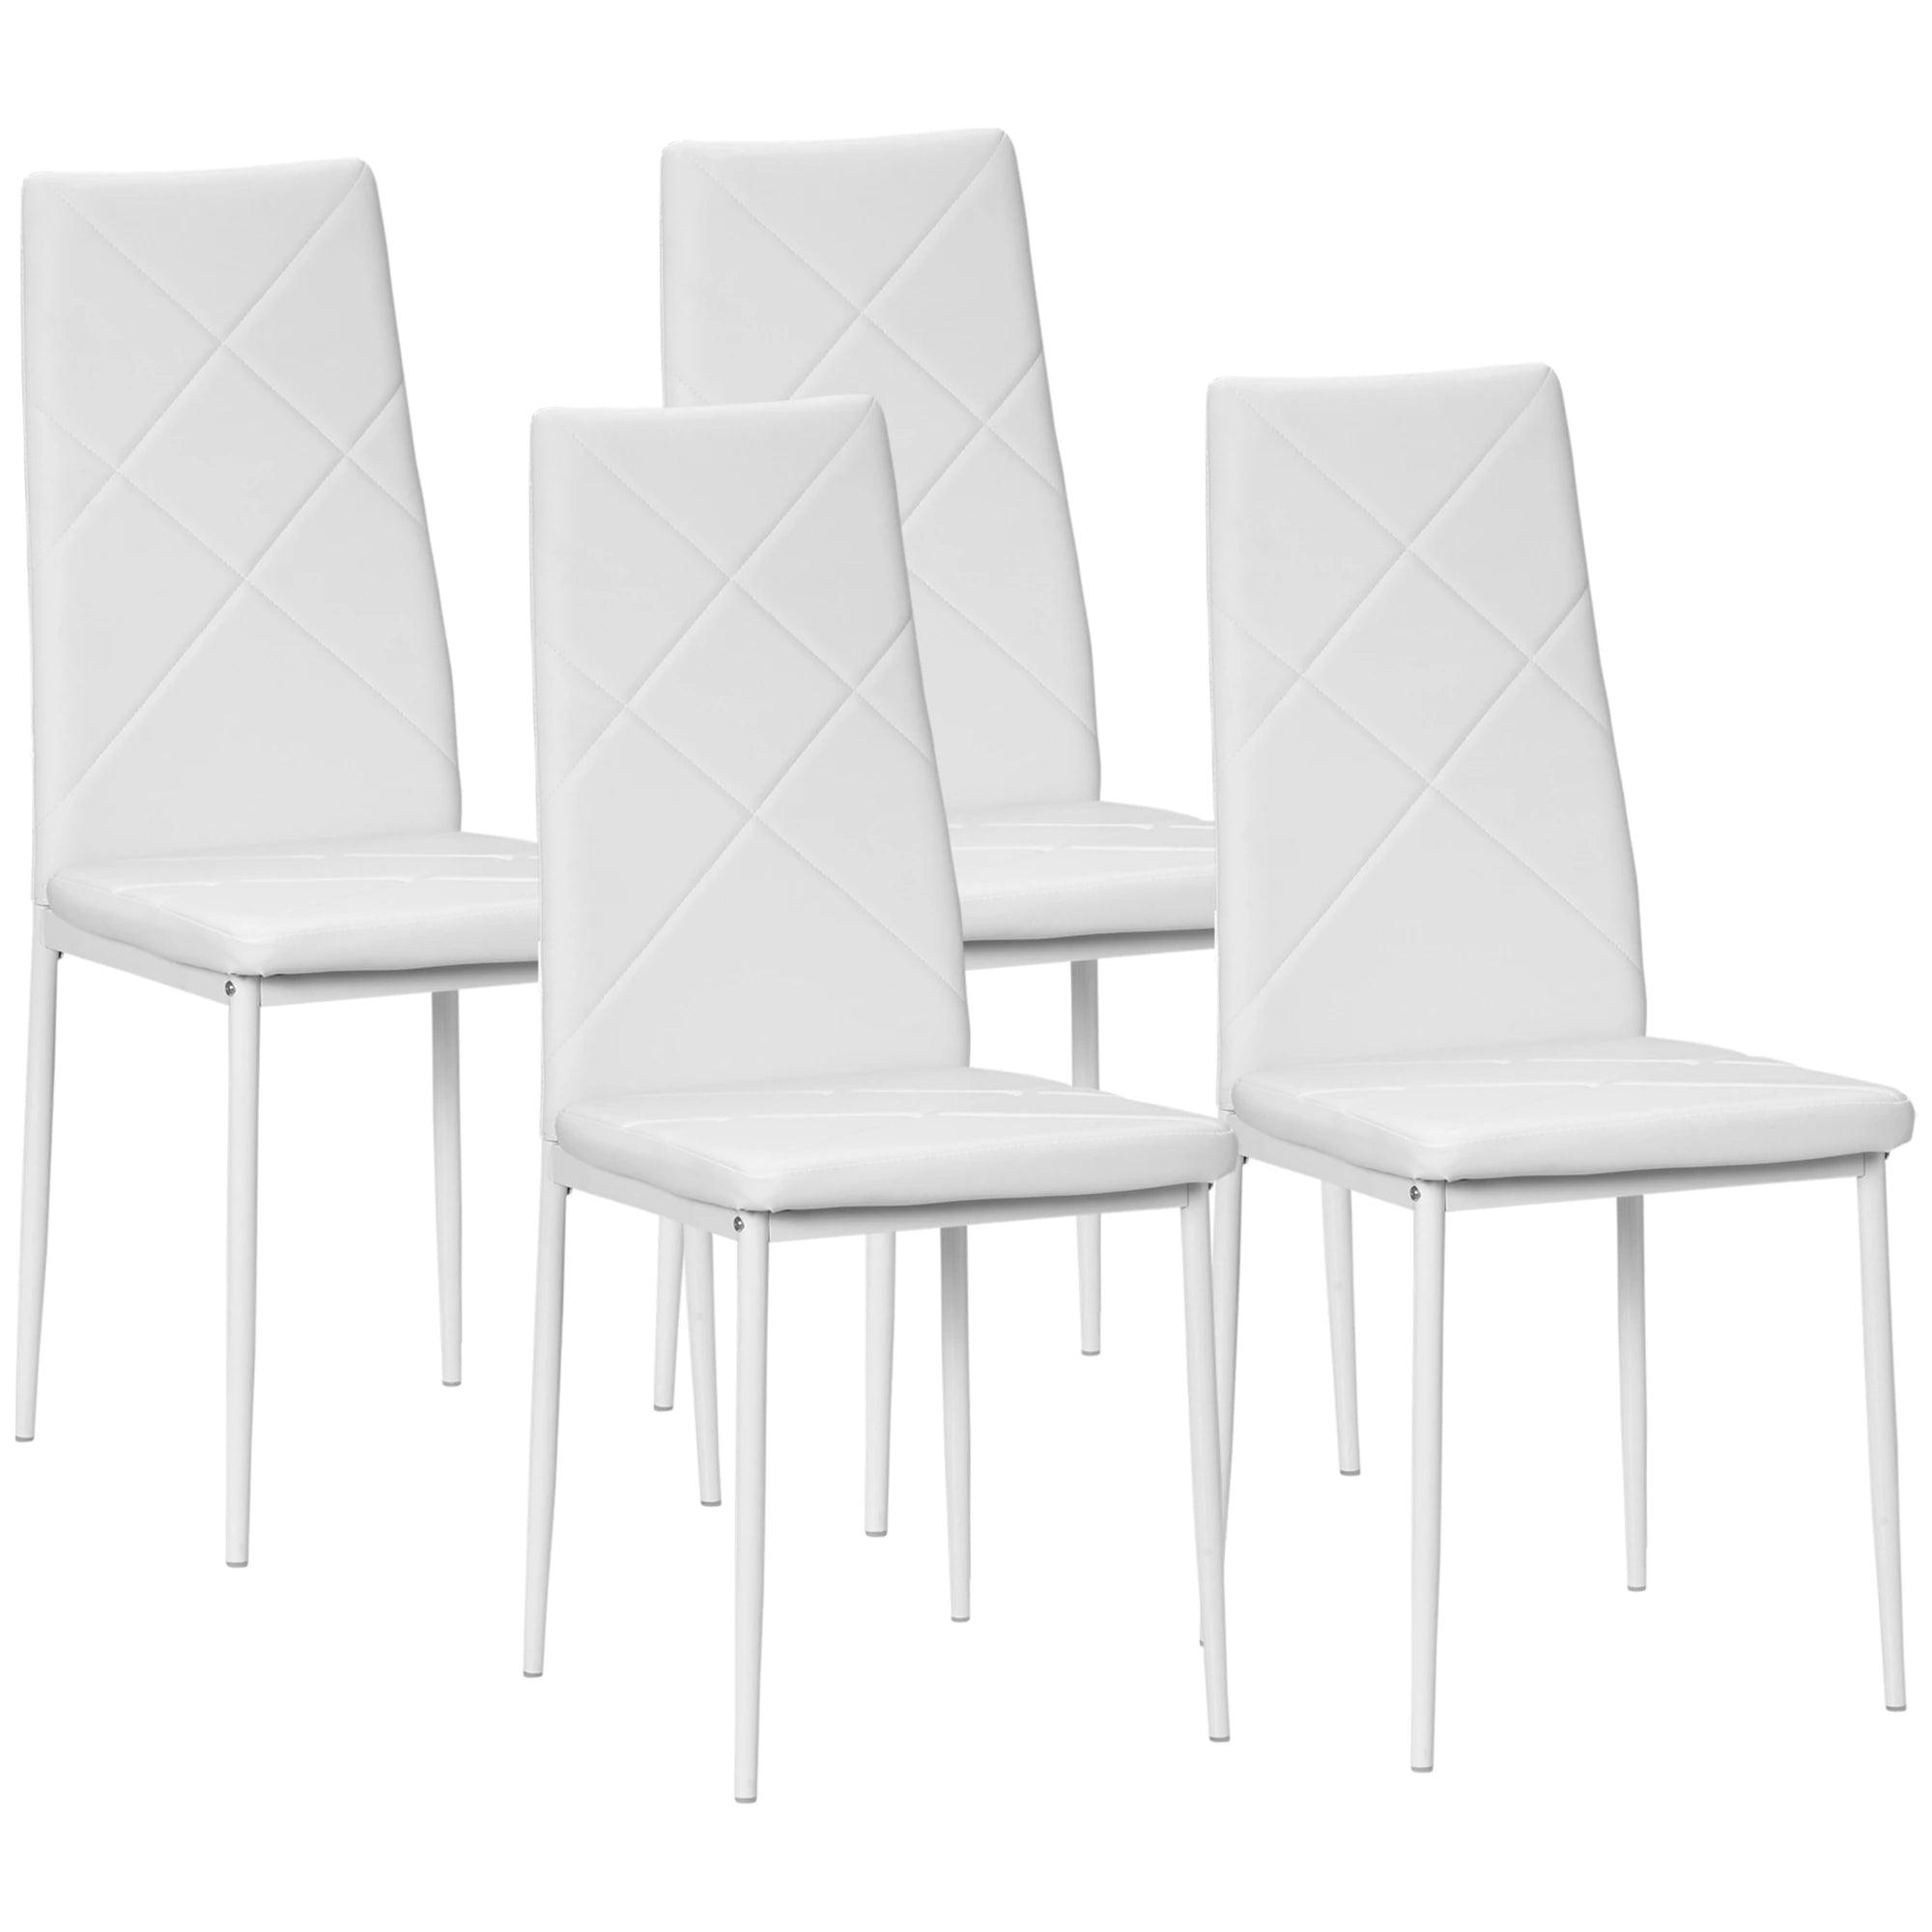 Dining Chairs Set of 4, Modern Accent Chair with High Back, Upholstery Faux Leather and Steel Legs